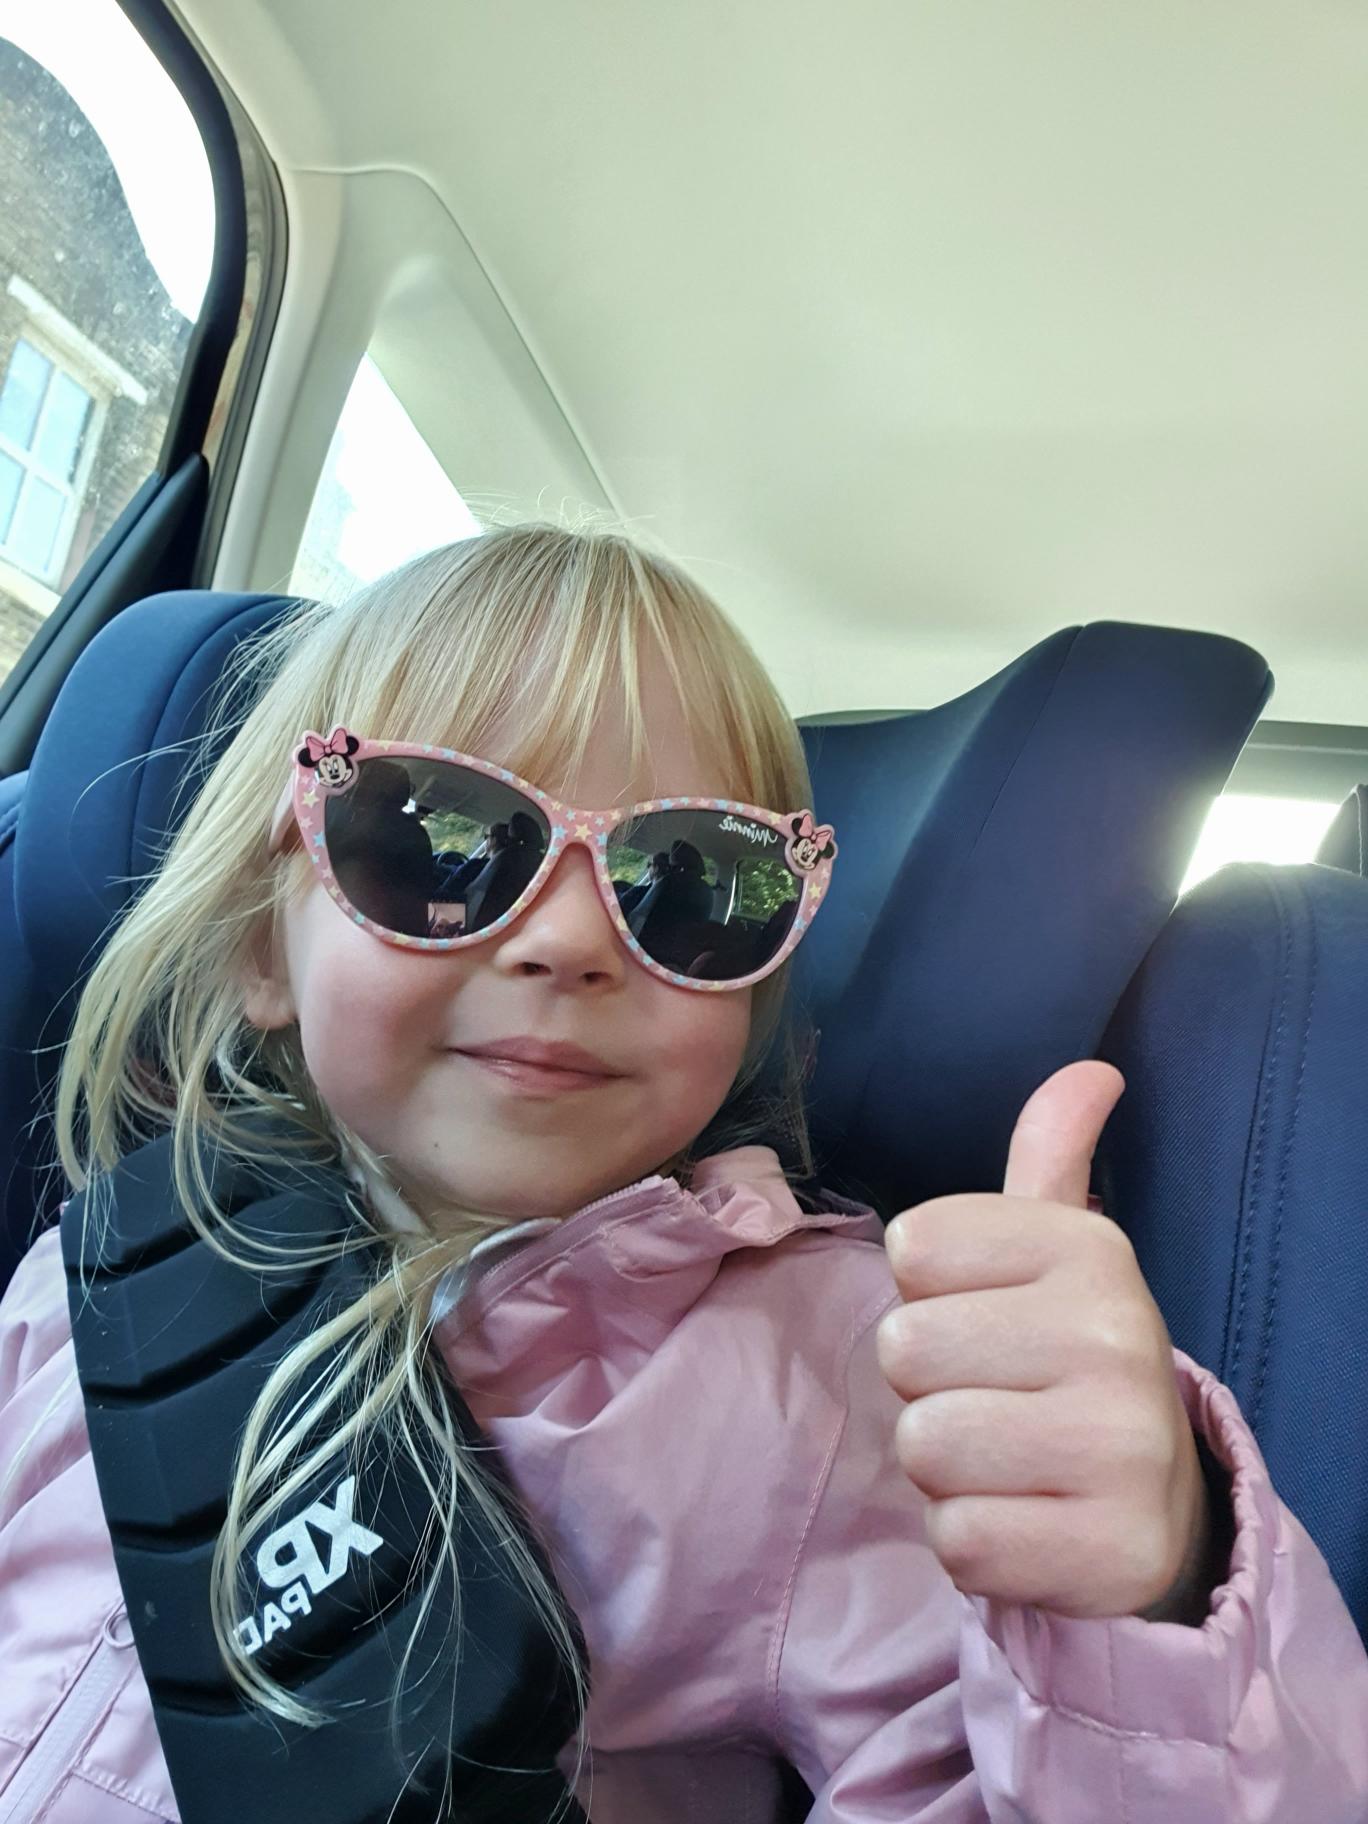 Blonde chid wearing sunglasses, sat in the seat of a car with thumbs up, smiling at the camera